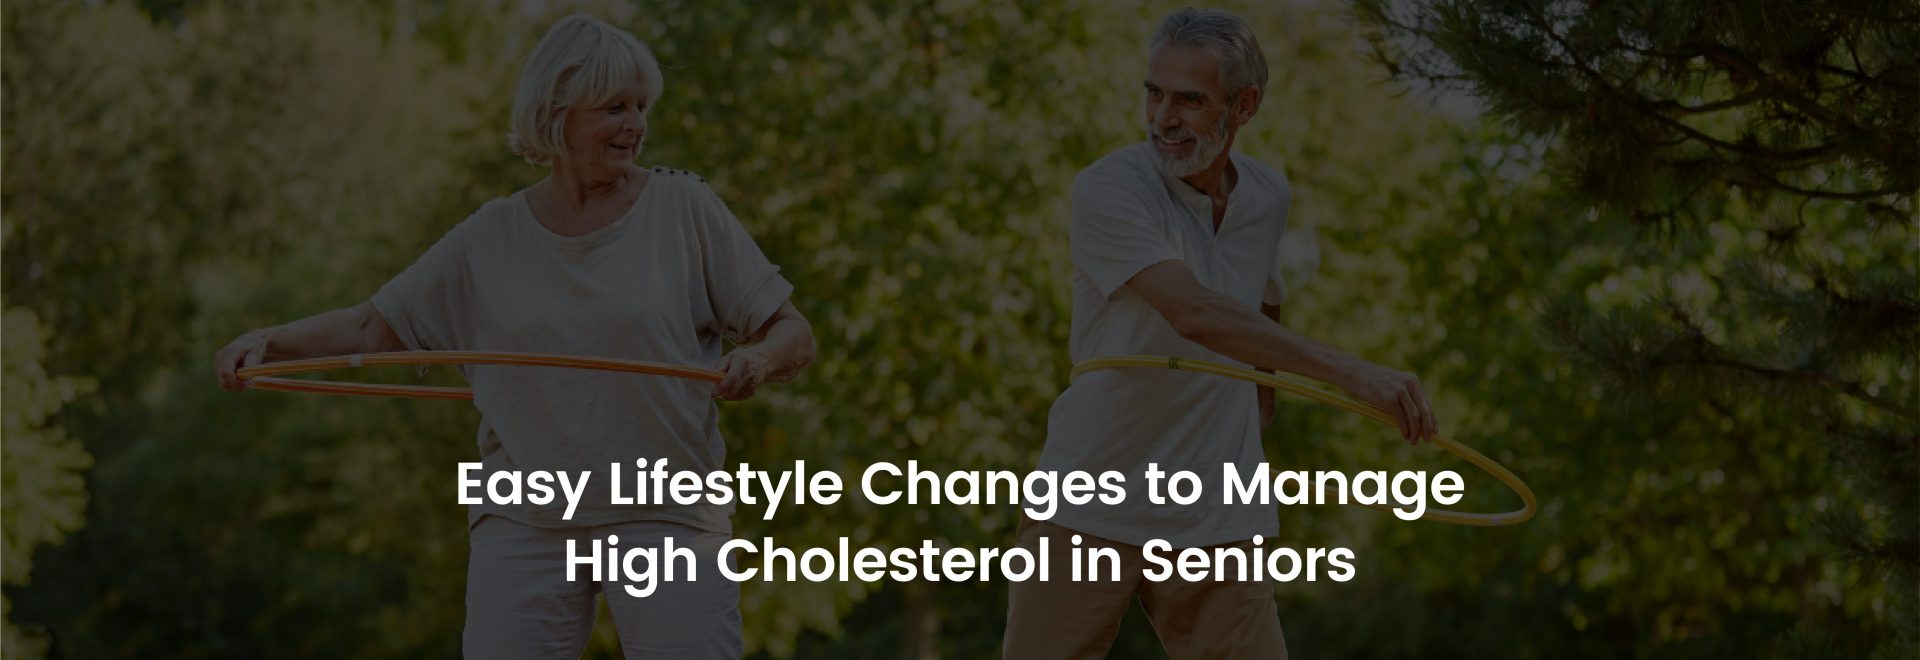 Easy Lifestyle Changes to Manage High Cholesterol in Seniors | Banner Image